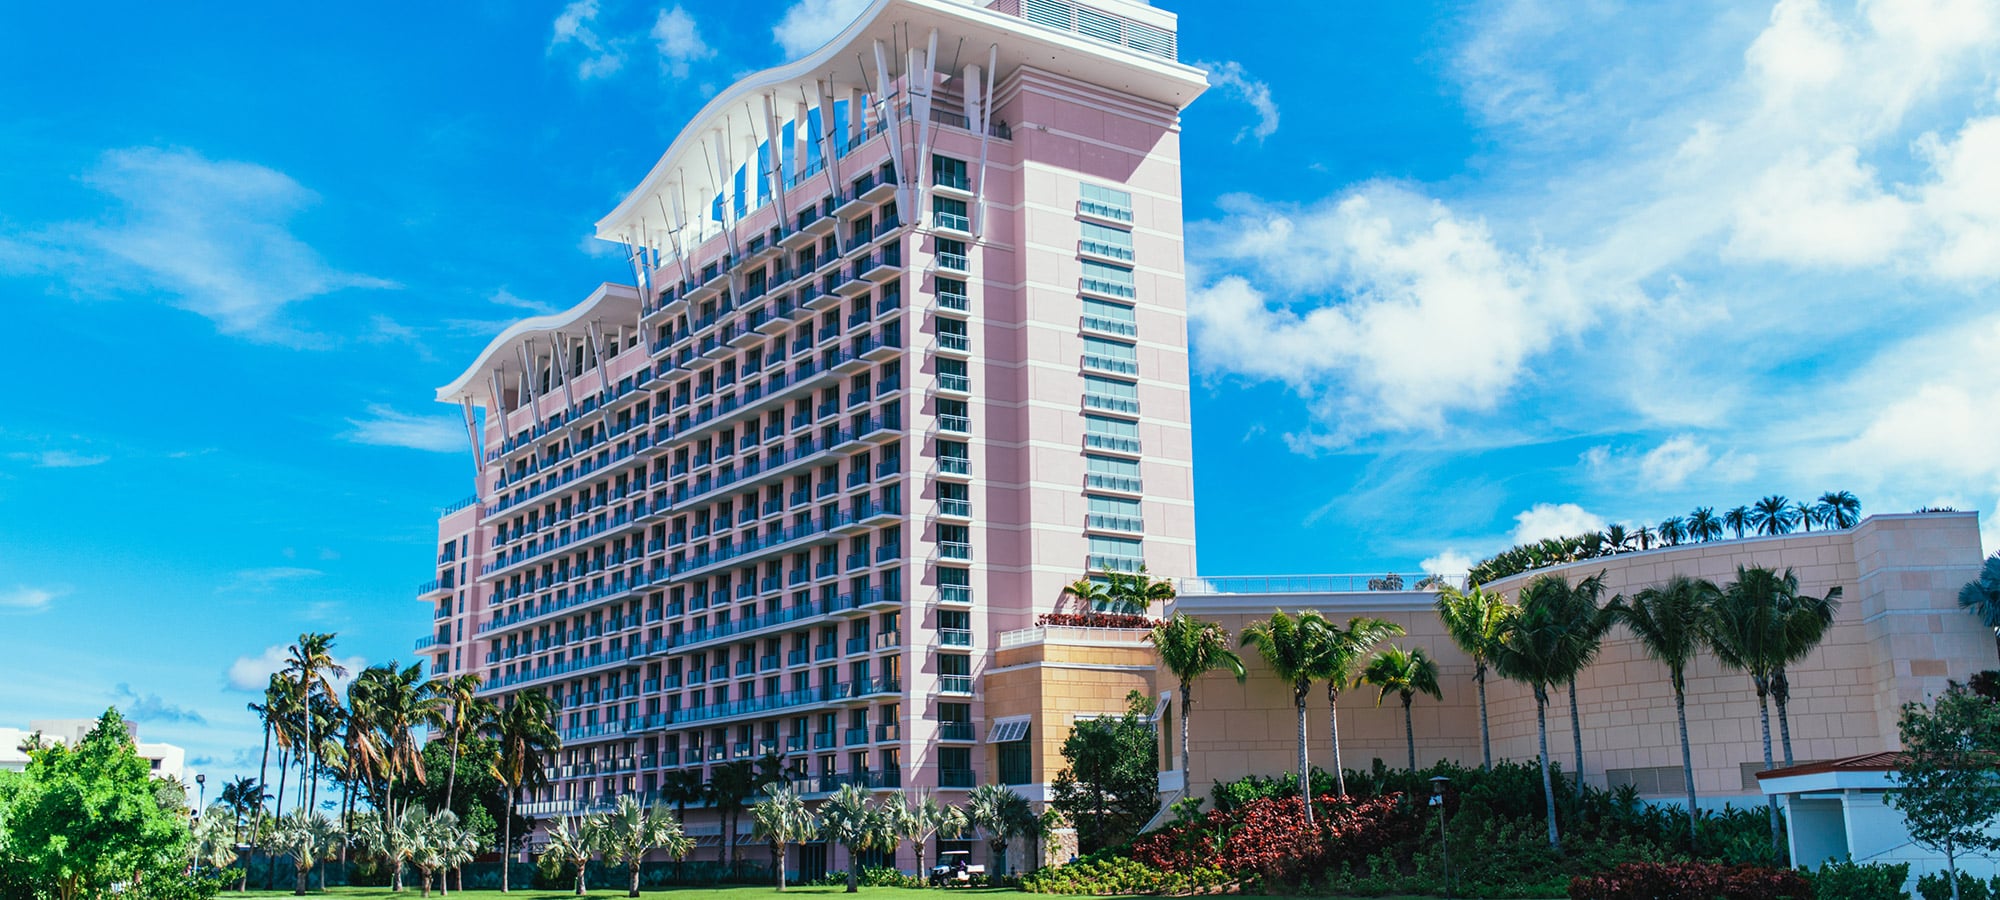 Here’s what we loved about this new hotel in the Bahamas, part of the long-anticipated resort development Baha Mar.